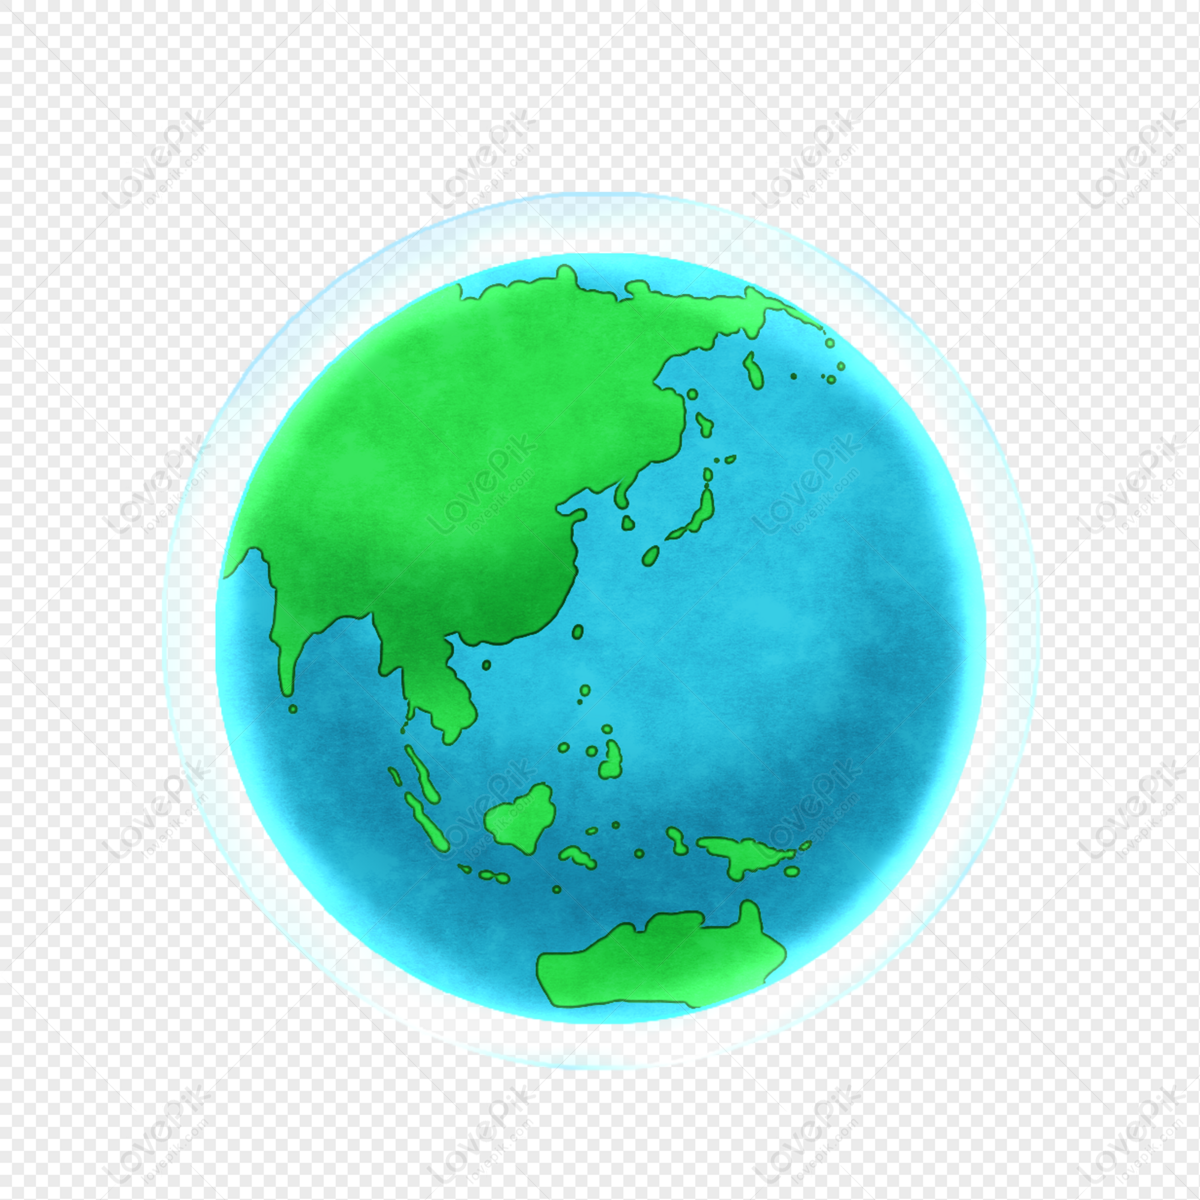 Earth Free PNG And Clipart Image For Free Download - Lovepik | 401691779